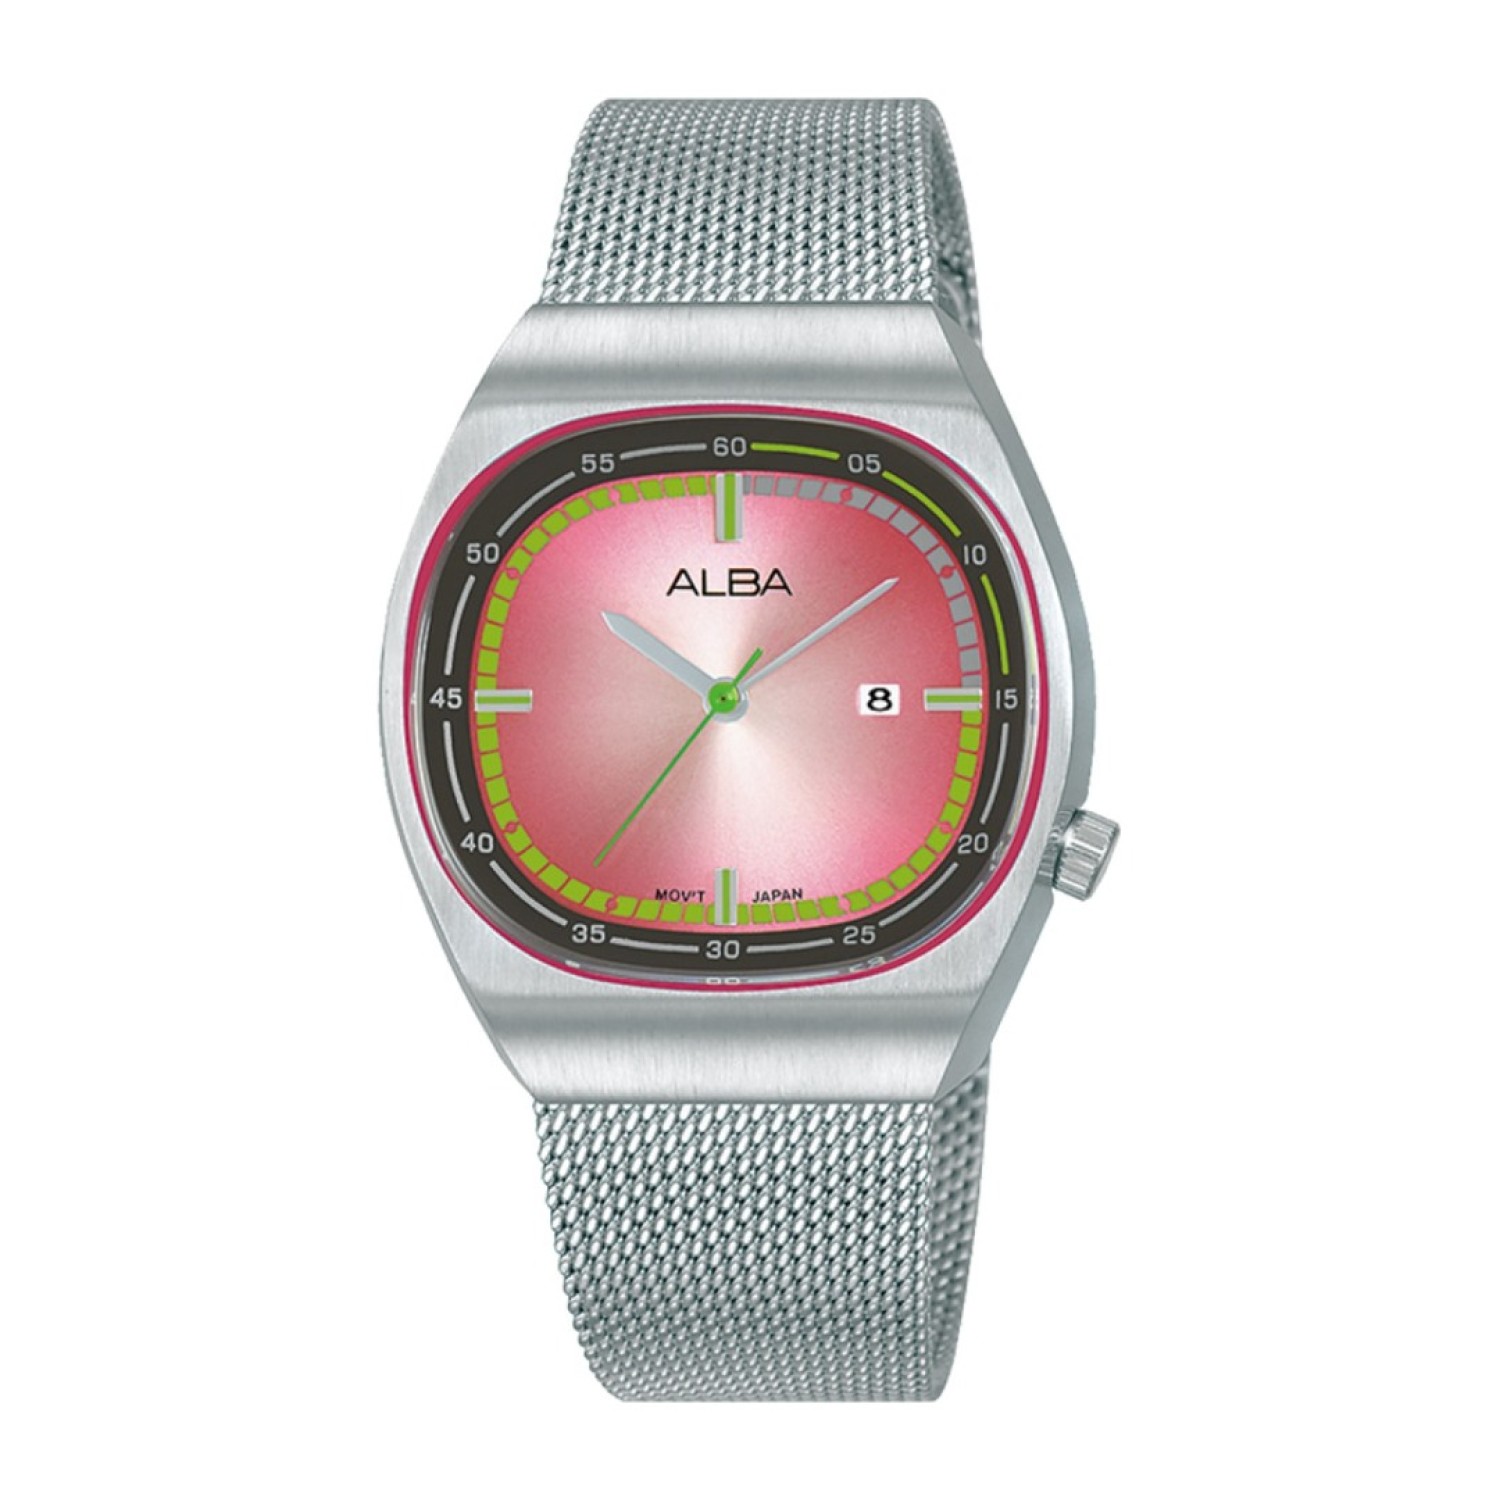 AH7Y29X1 ALBA FUSION SILVER DRESS WATCH. unique engagement rings nz  AH7Y29X1  ALBA FUSION SILVER DRESS WATCH  is a sleek and modern timepiece designed for women.